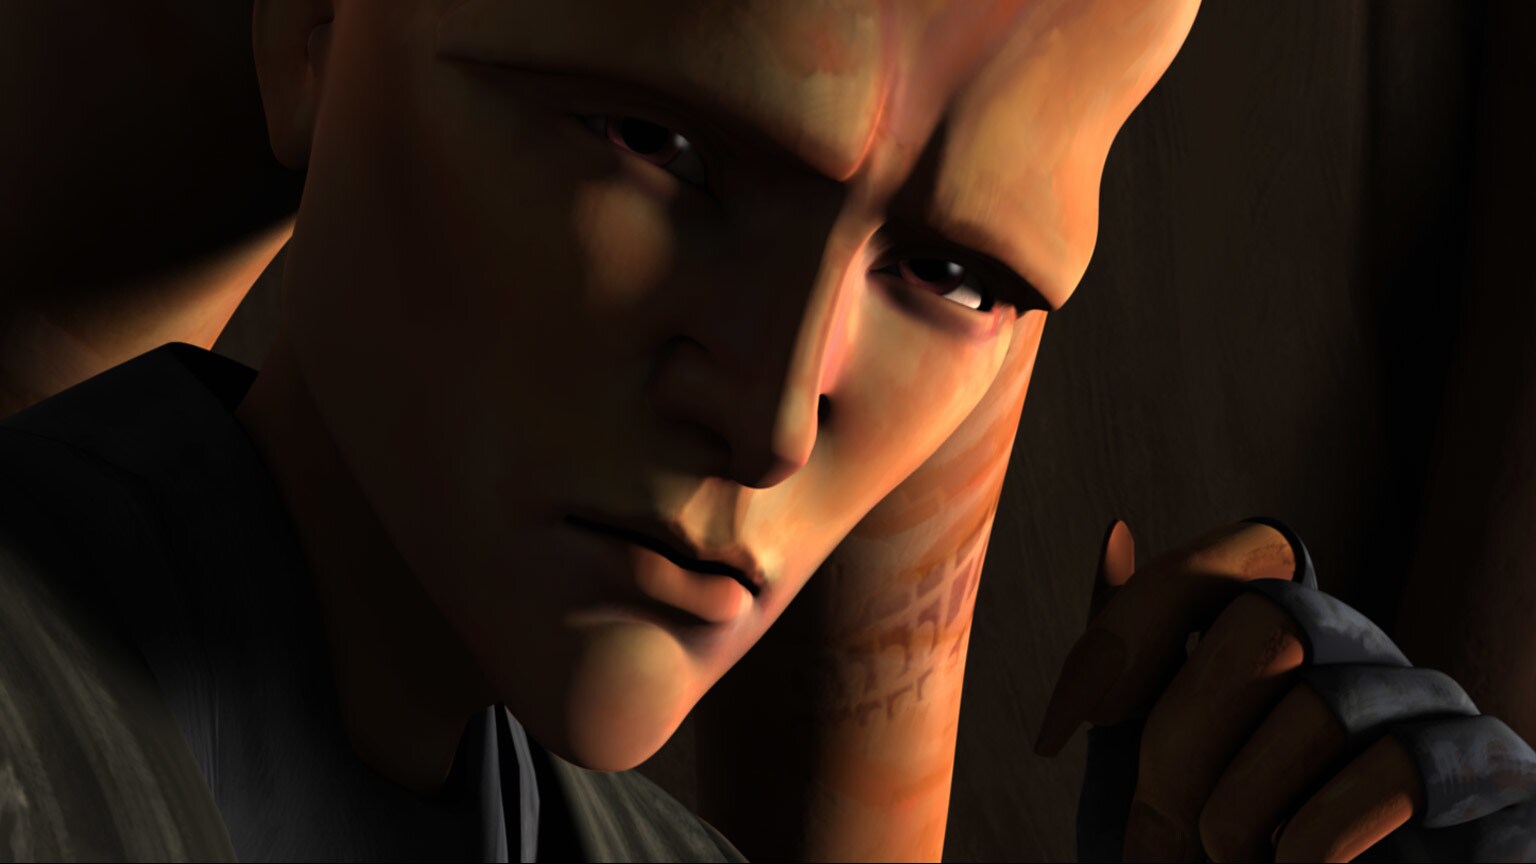 The Clone Wars Rewatch: The Price of "Liberty on Ryloth"